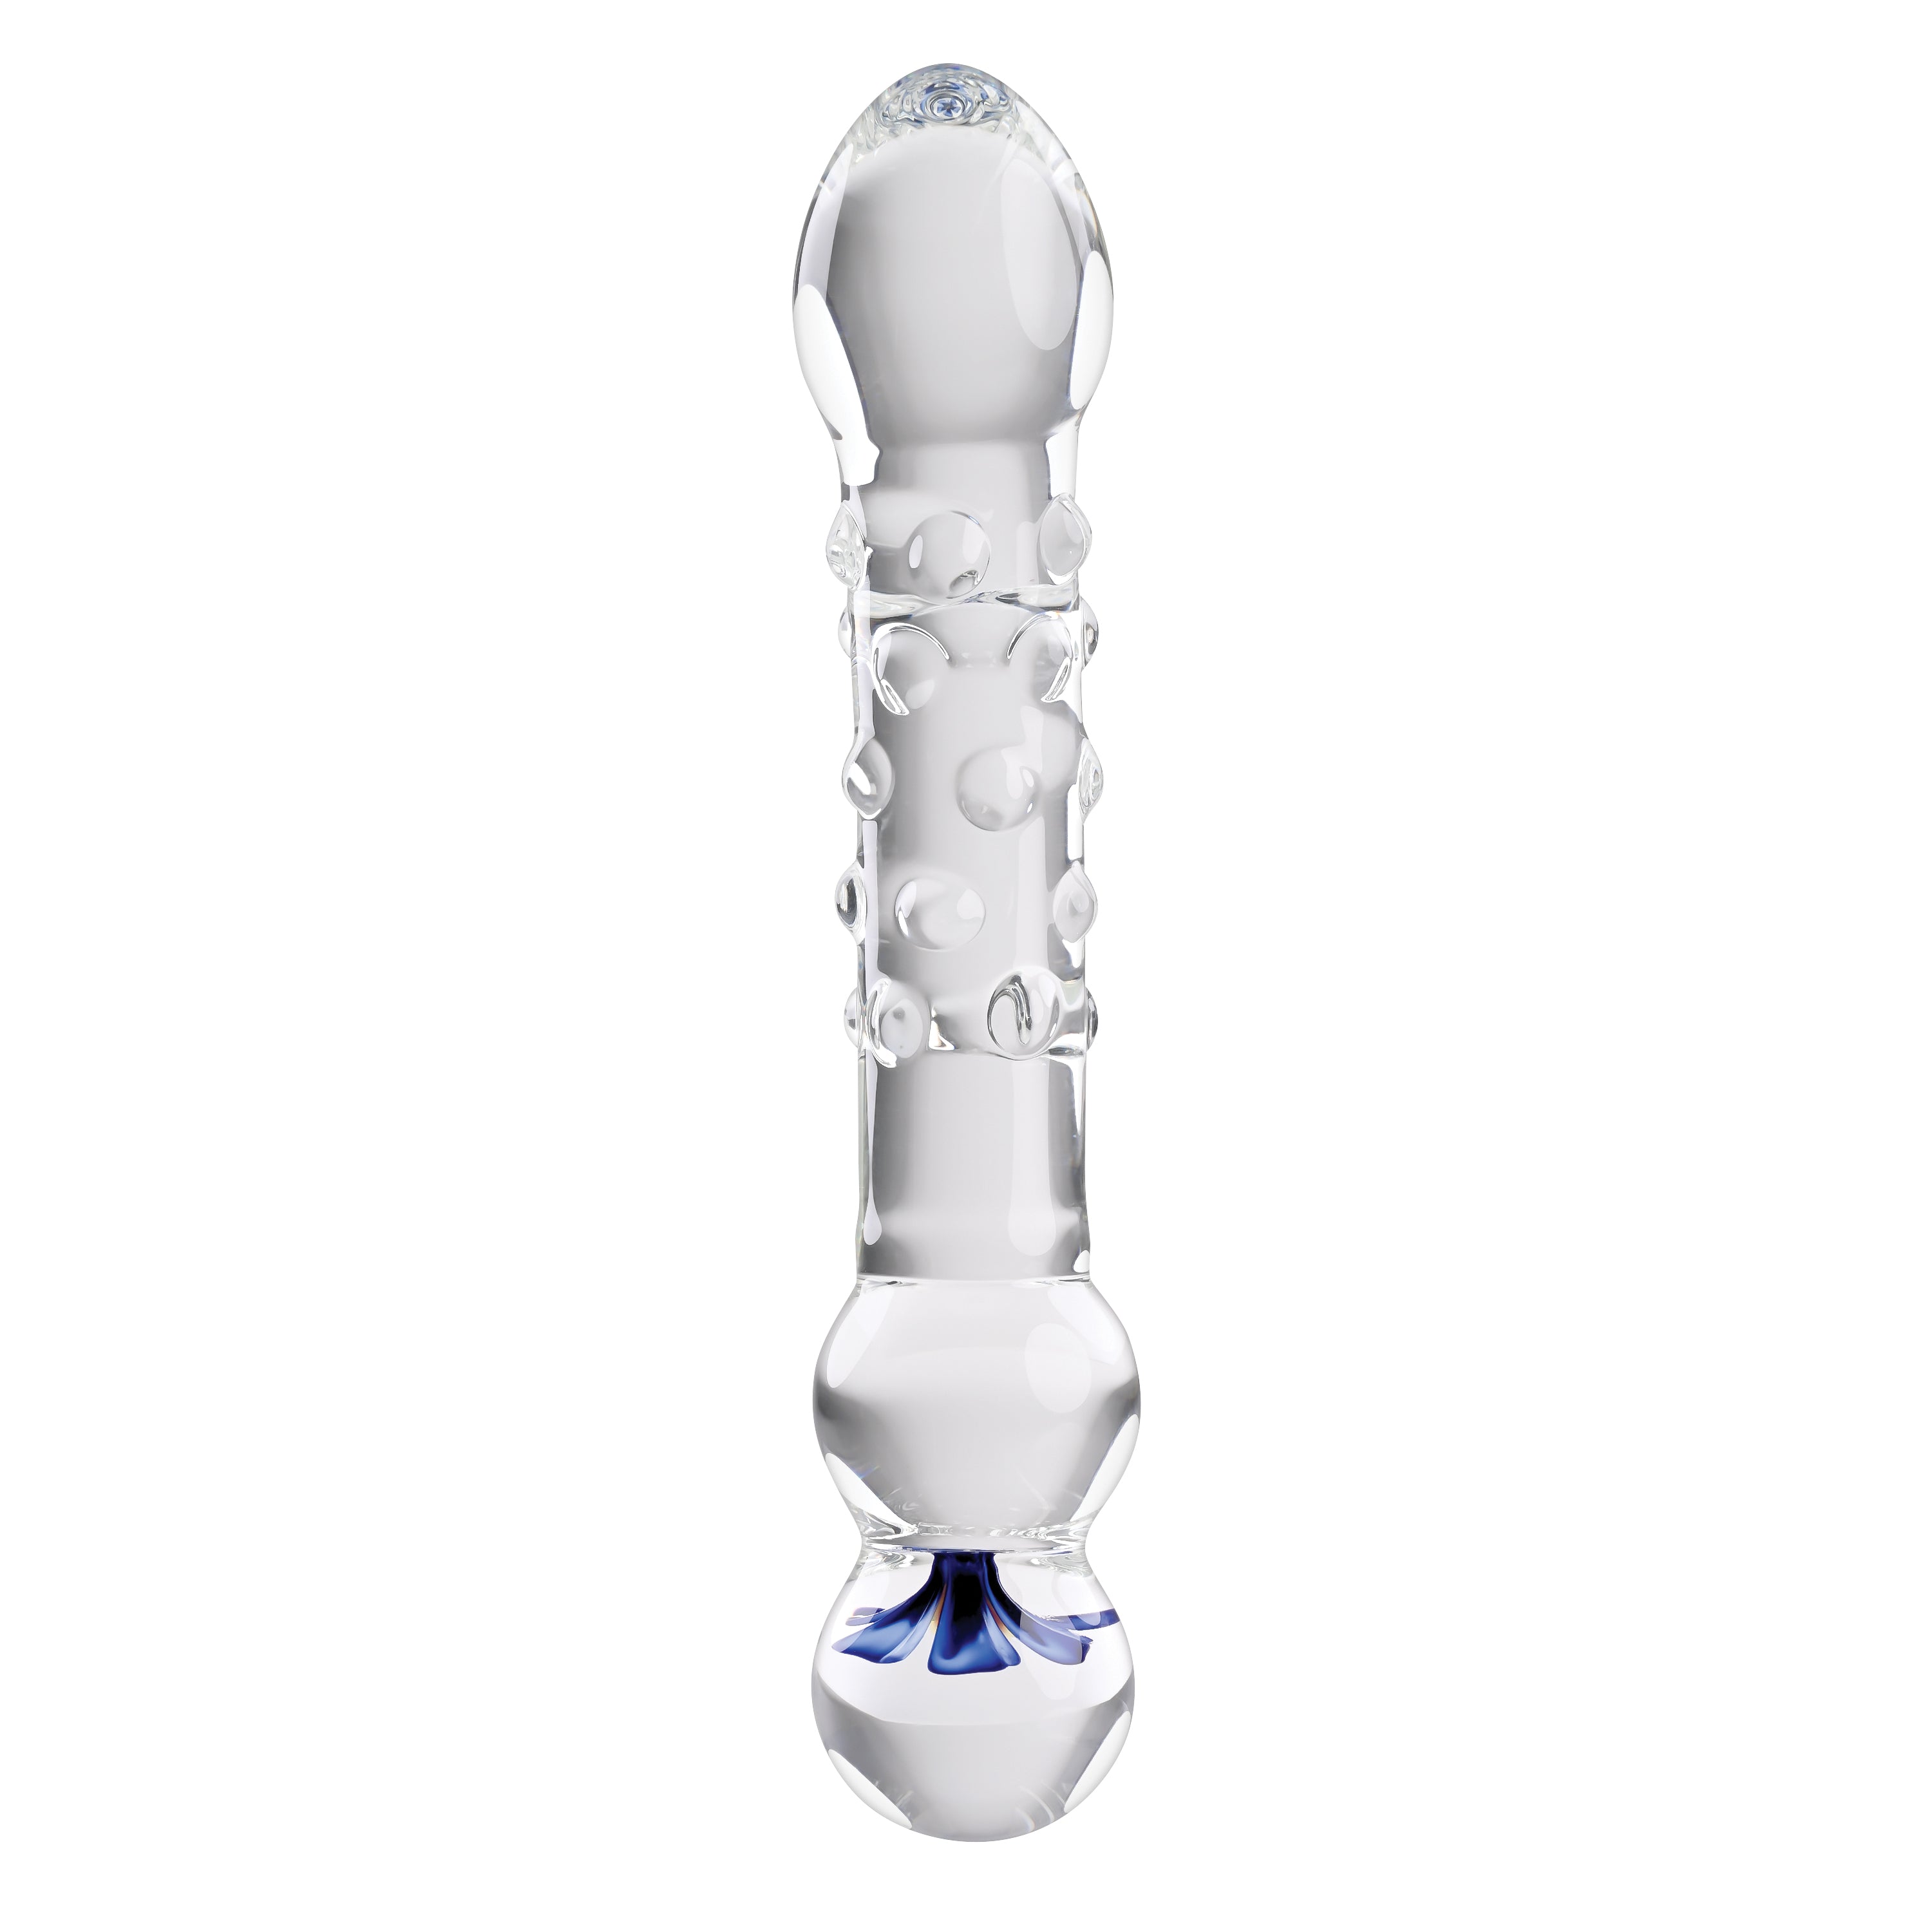 Intrigue KRYSTL #16 Double Ended Glass Dildo